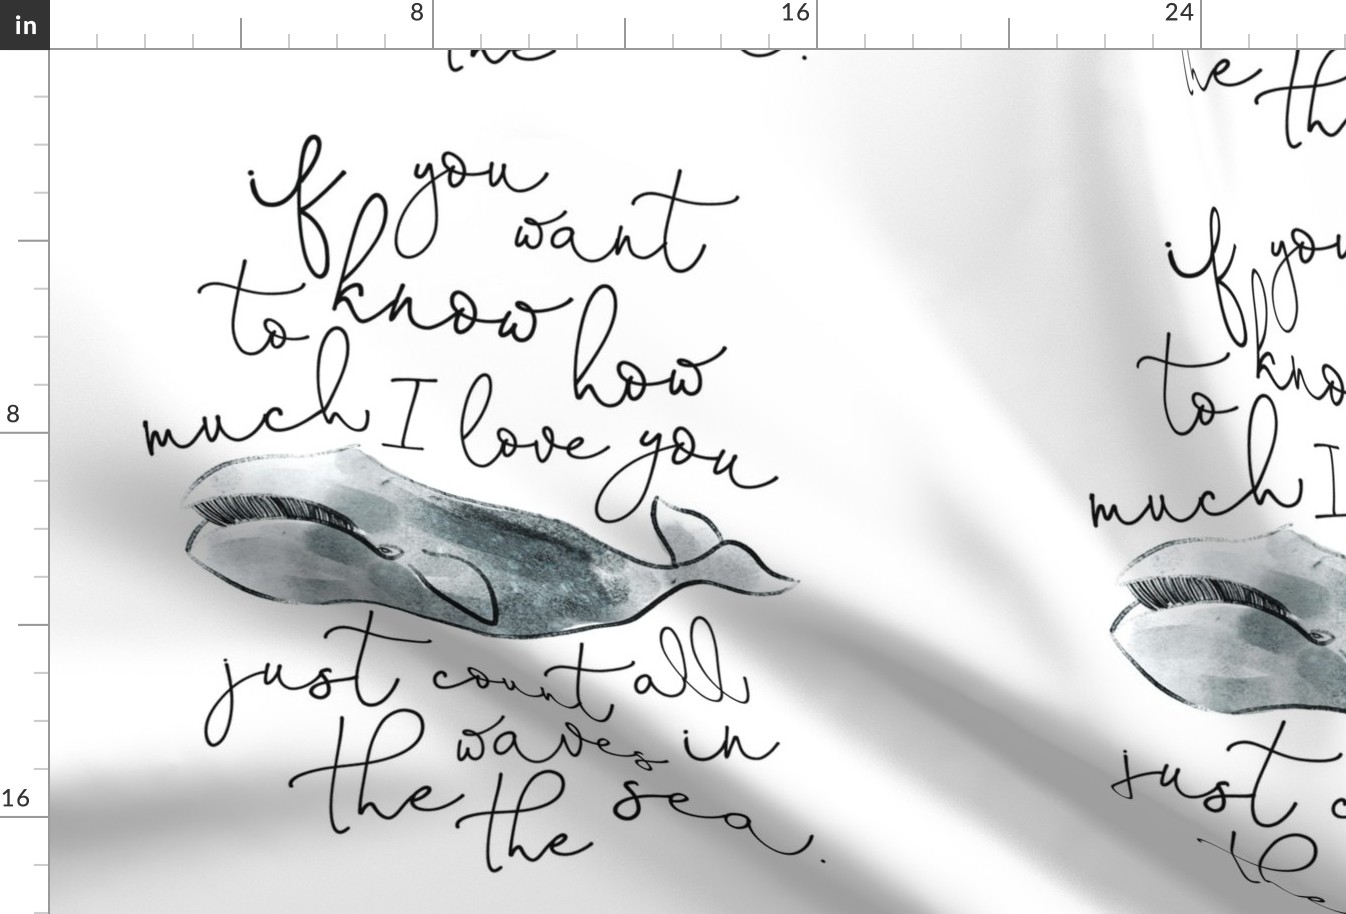 6 loveys: gray whale // if you want to know how much I love you // no lines